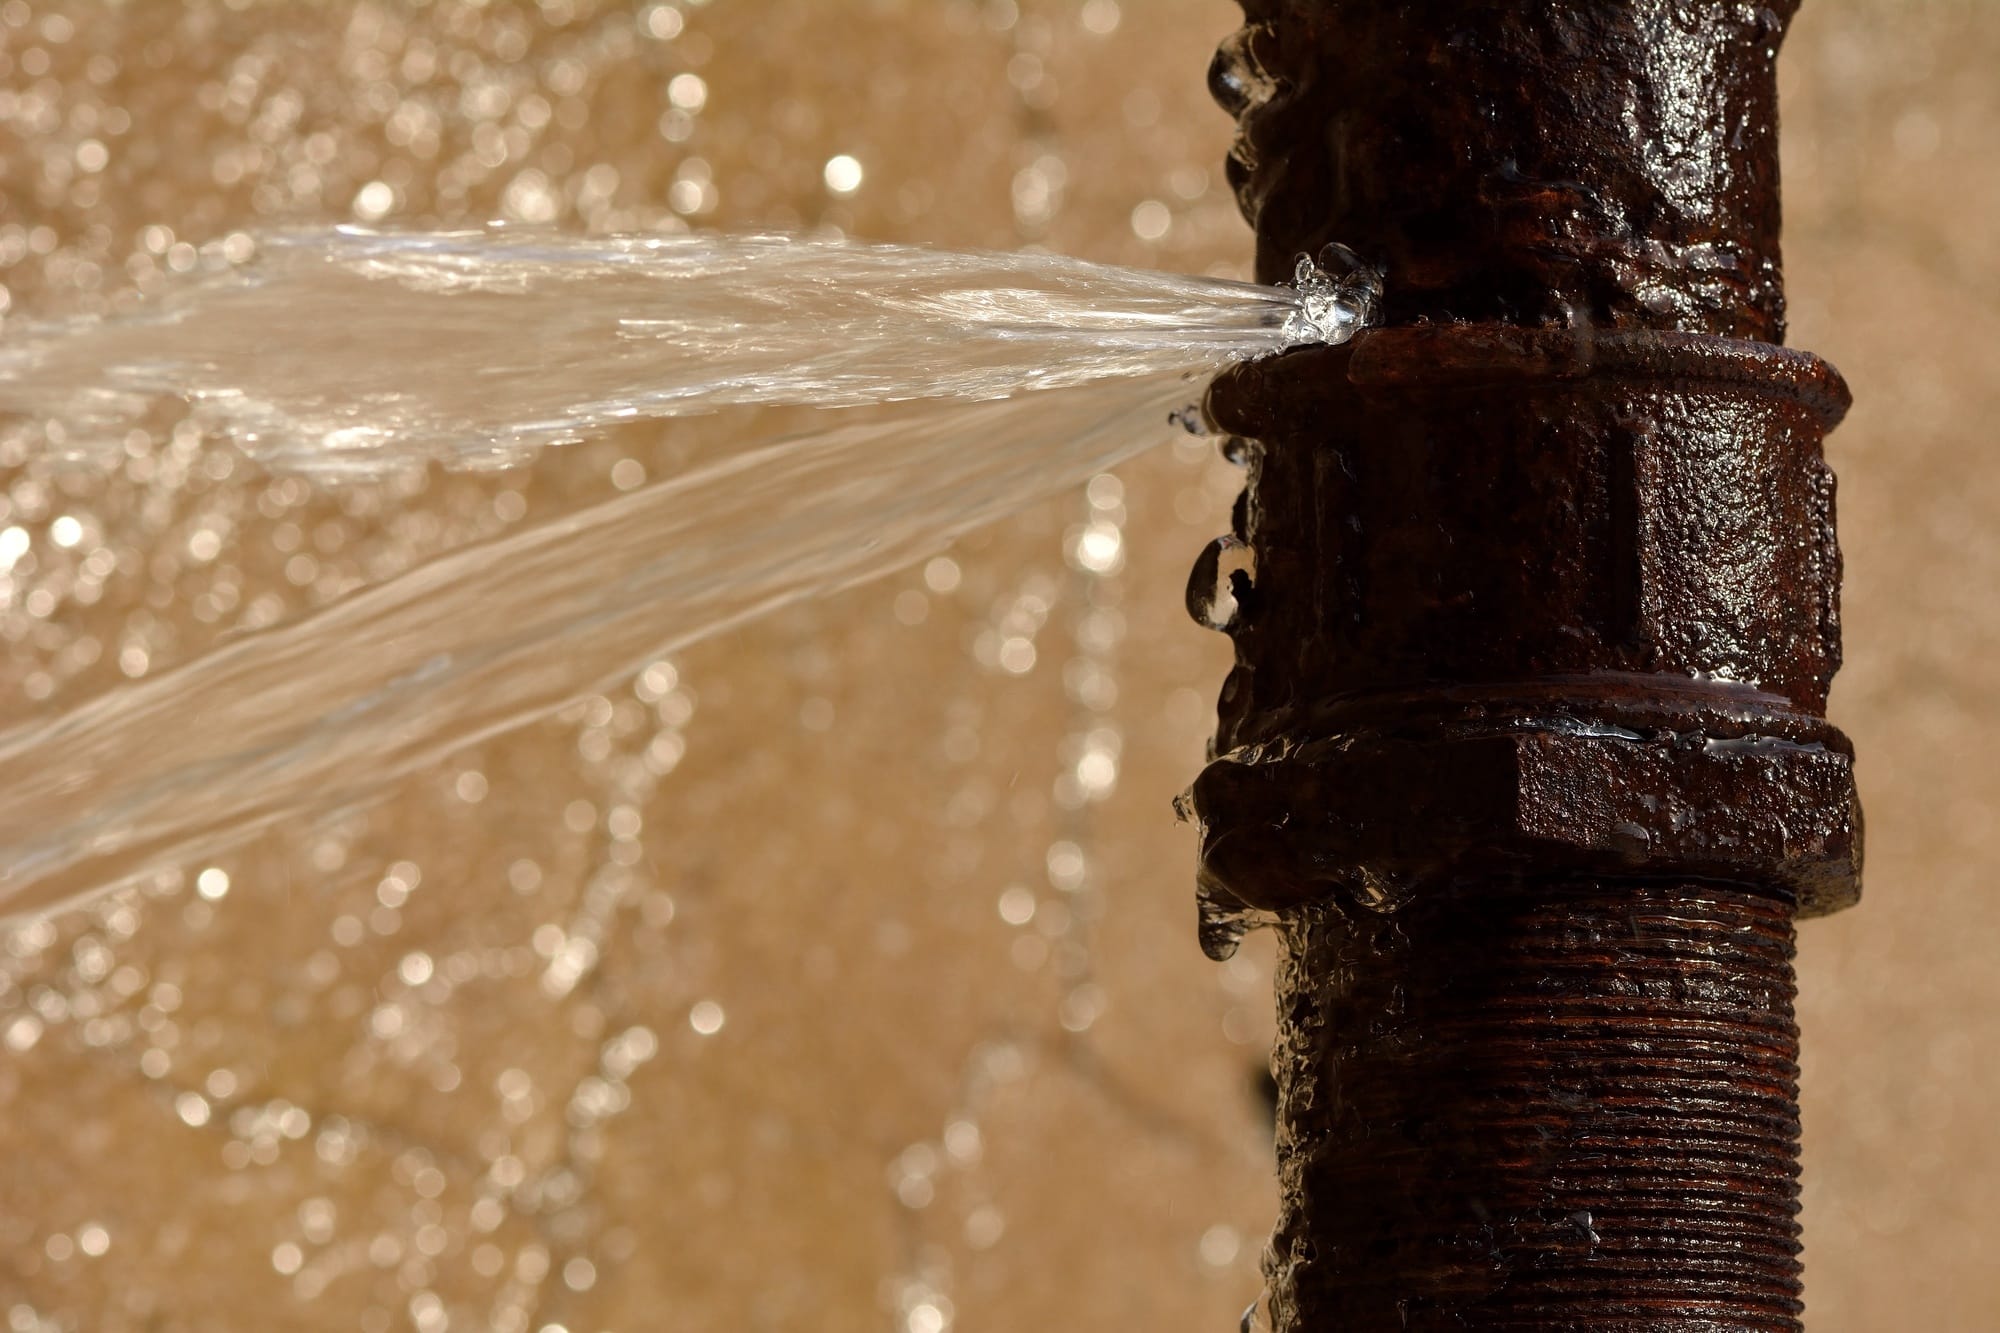 What Is Considered a Plumbing Emergency?